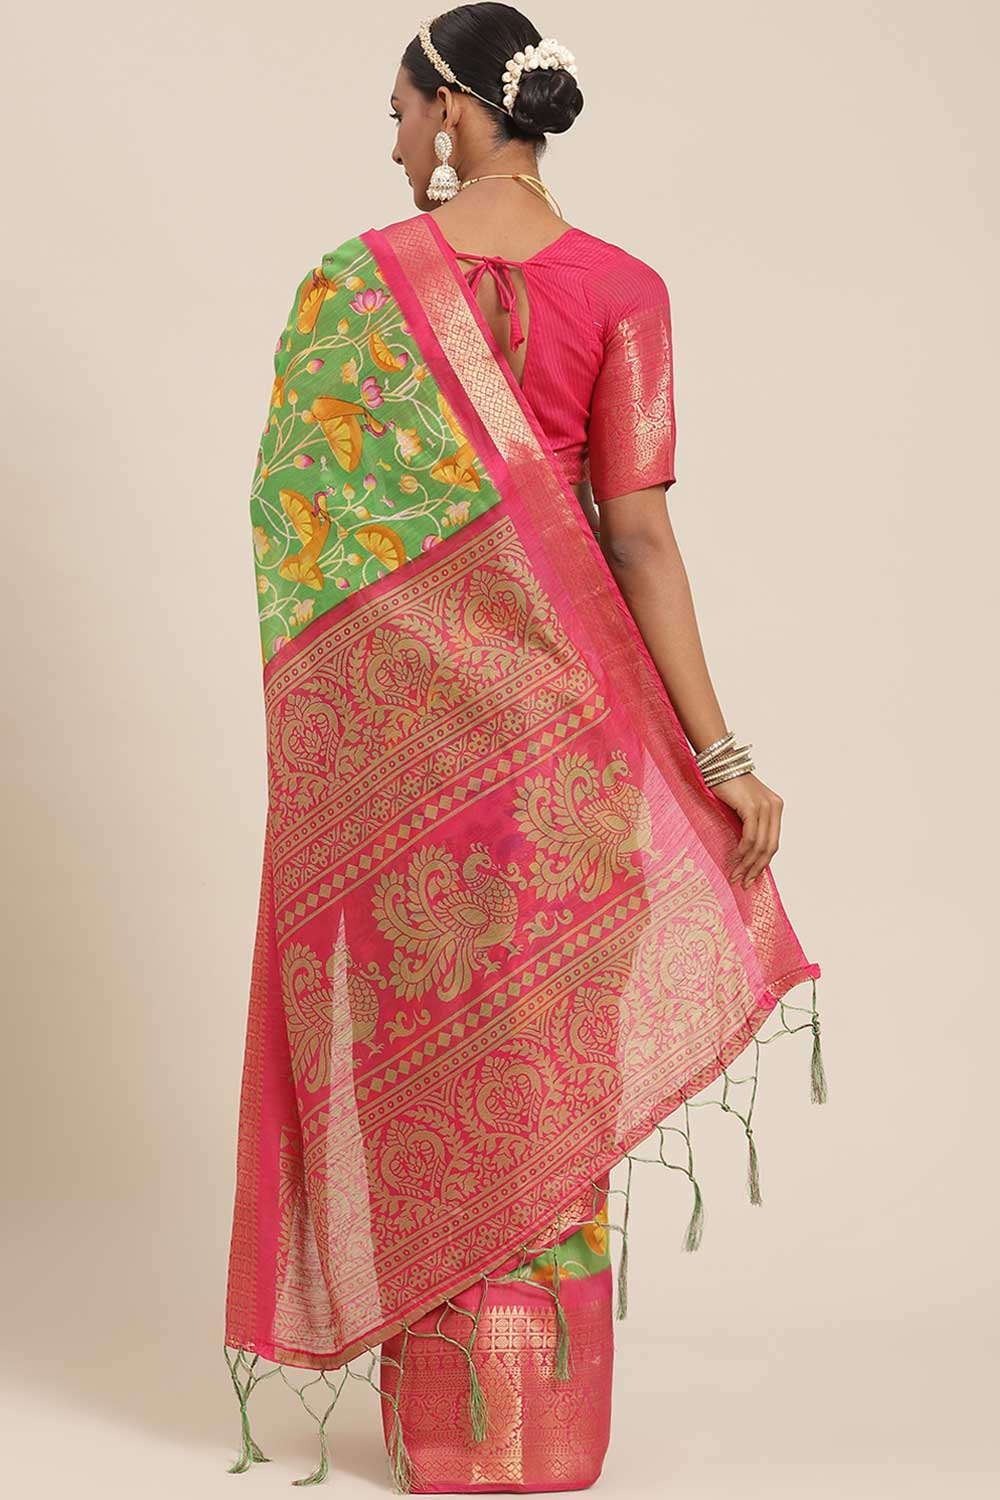 Shop Sola Green Kalamkari Blended Cotton One Minute Saree at best offer at our  Store - One Minute Saree